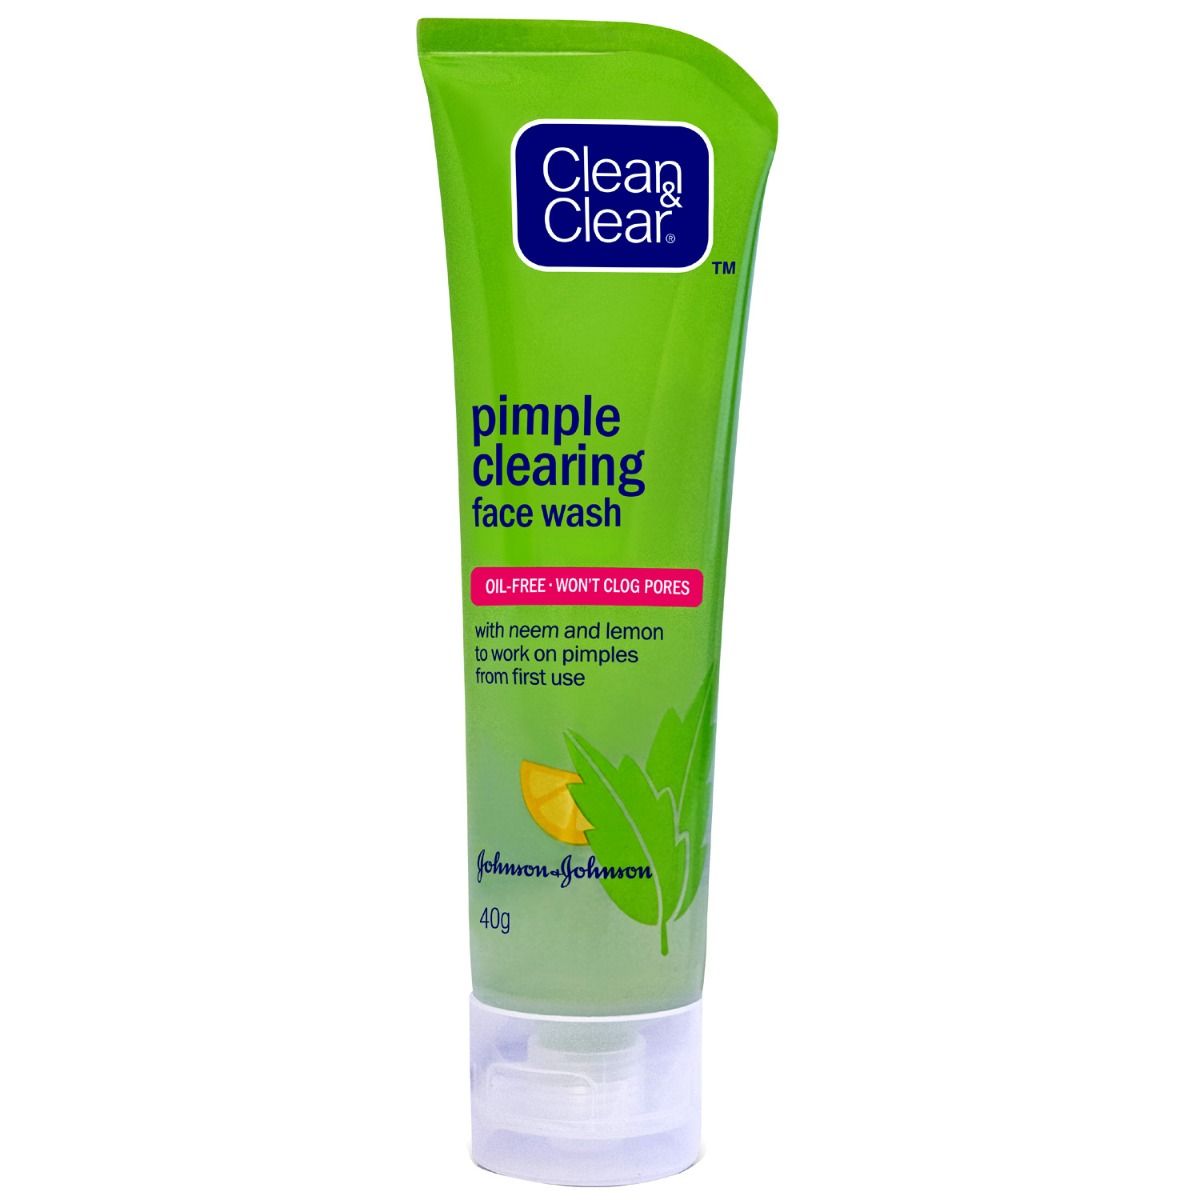 Clean & Clear Pimple Clearing Face Wash, 40 gm, Pack of 1 